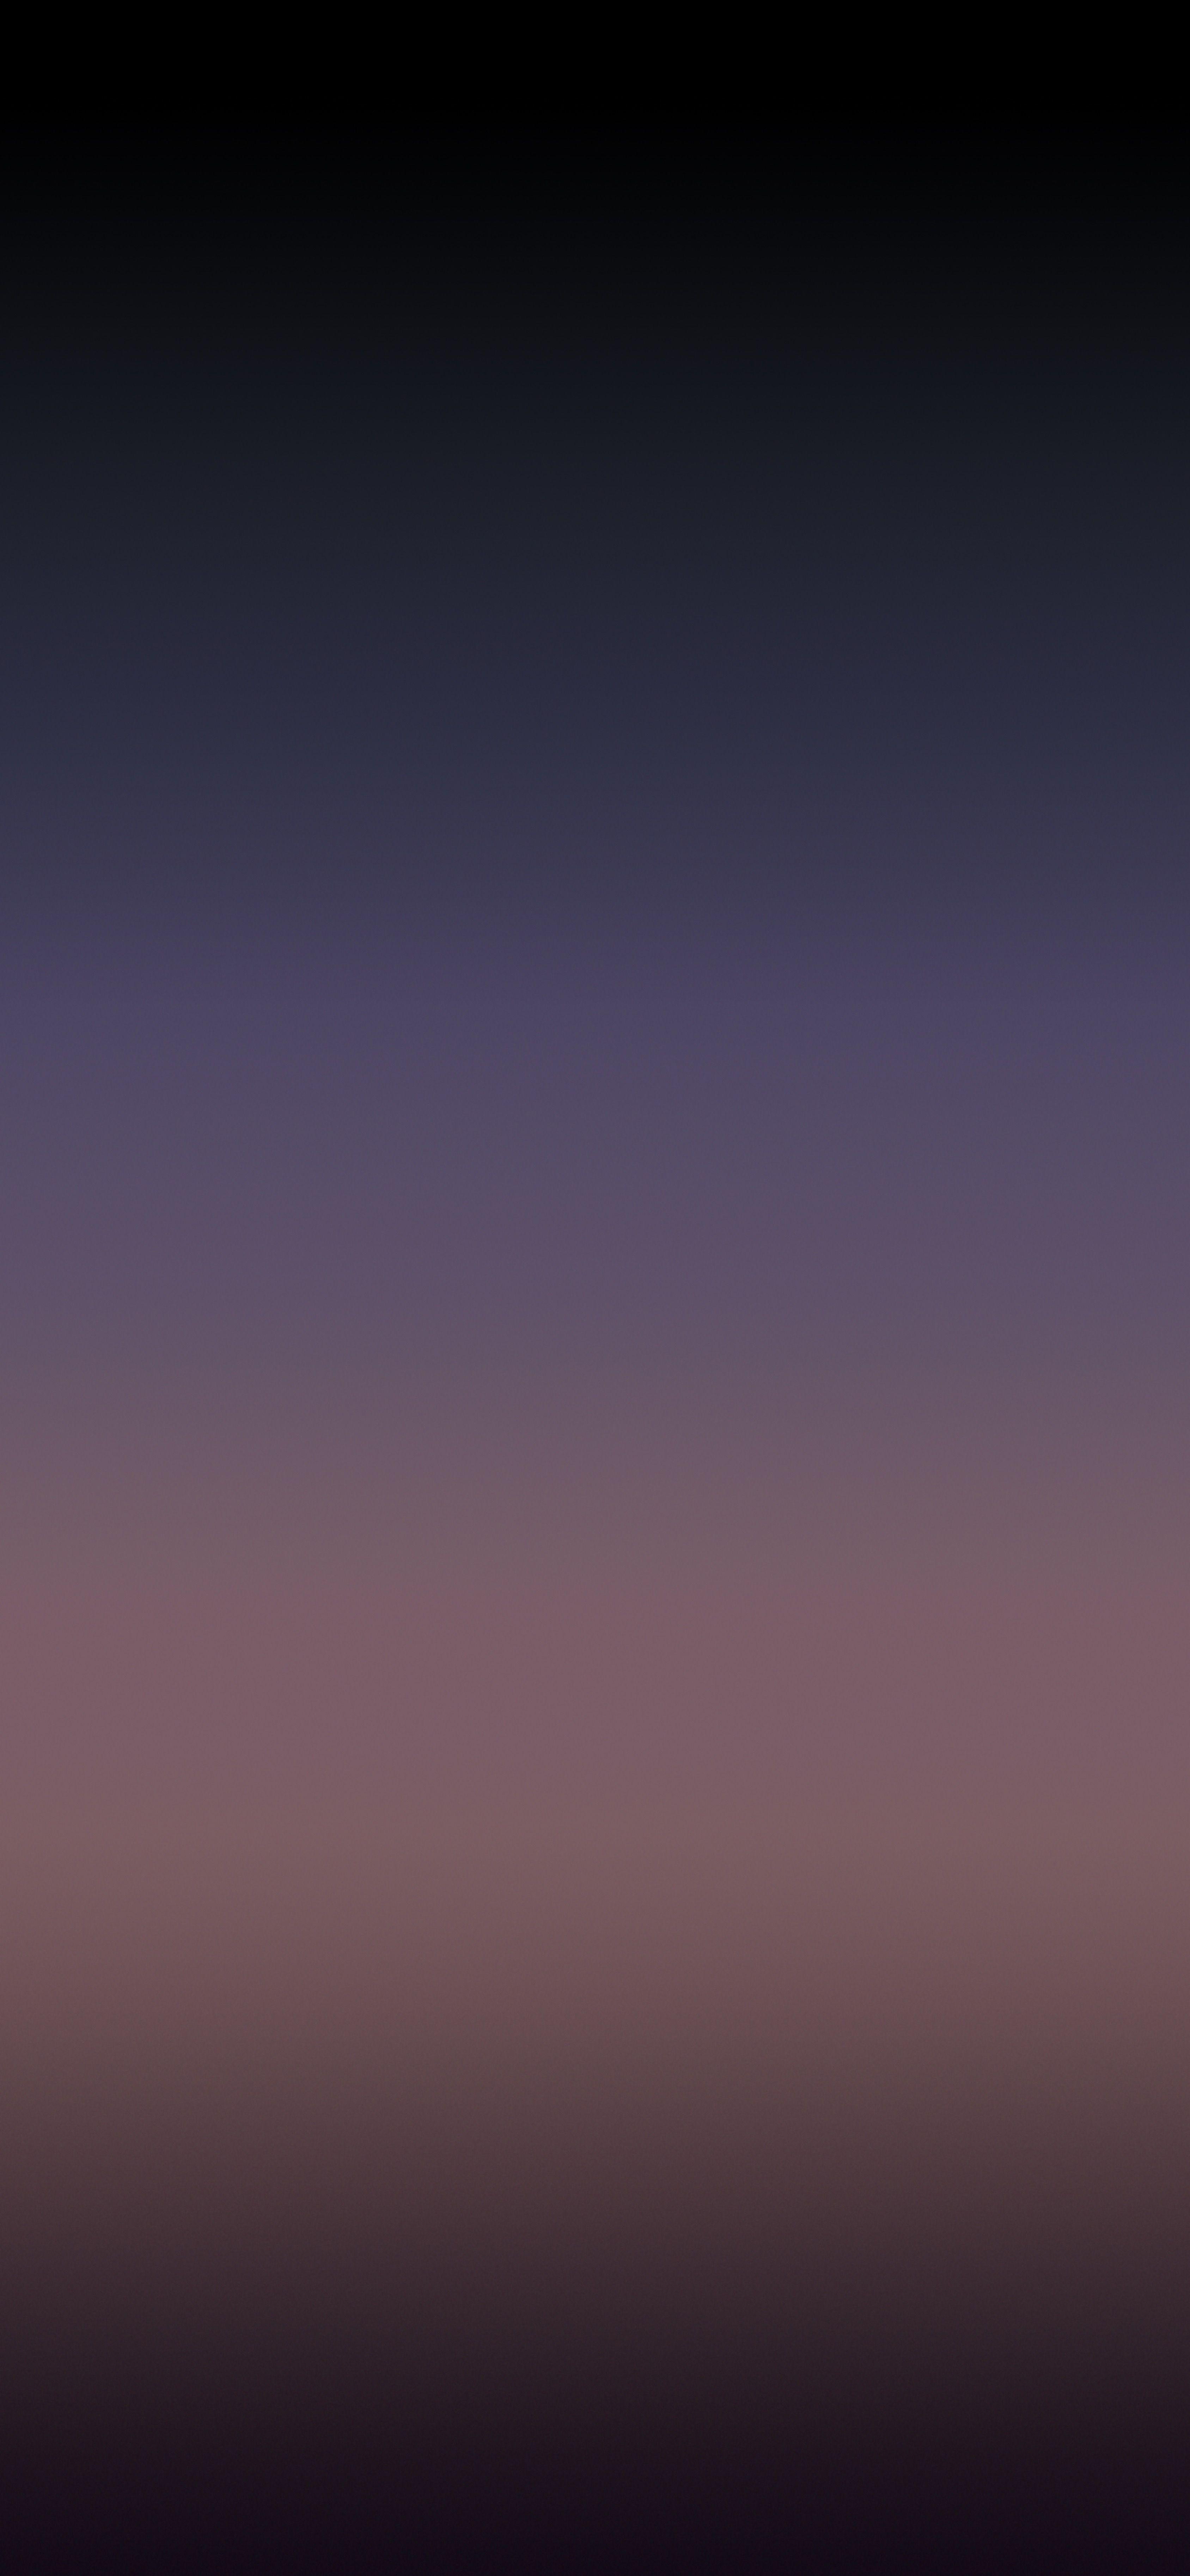 Minimal gradient wallpaper to hide the iPhone X notch